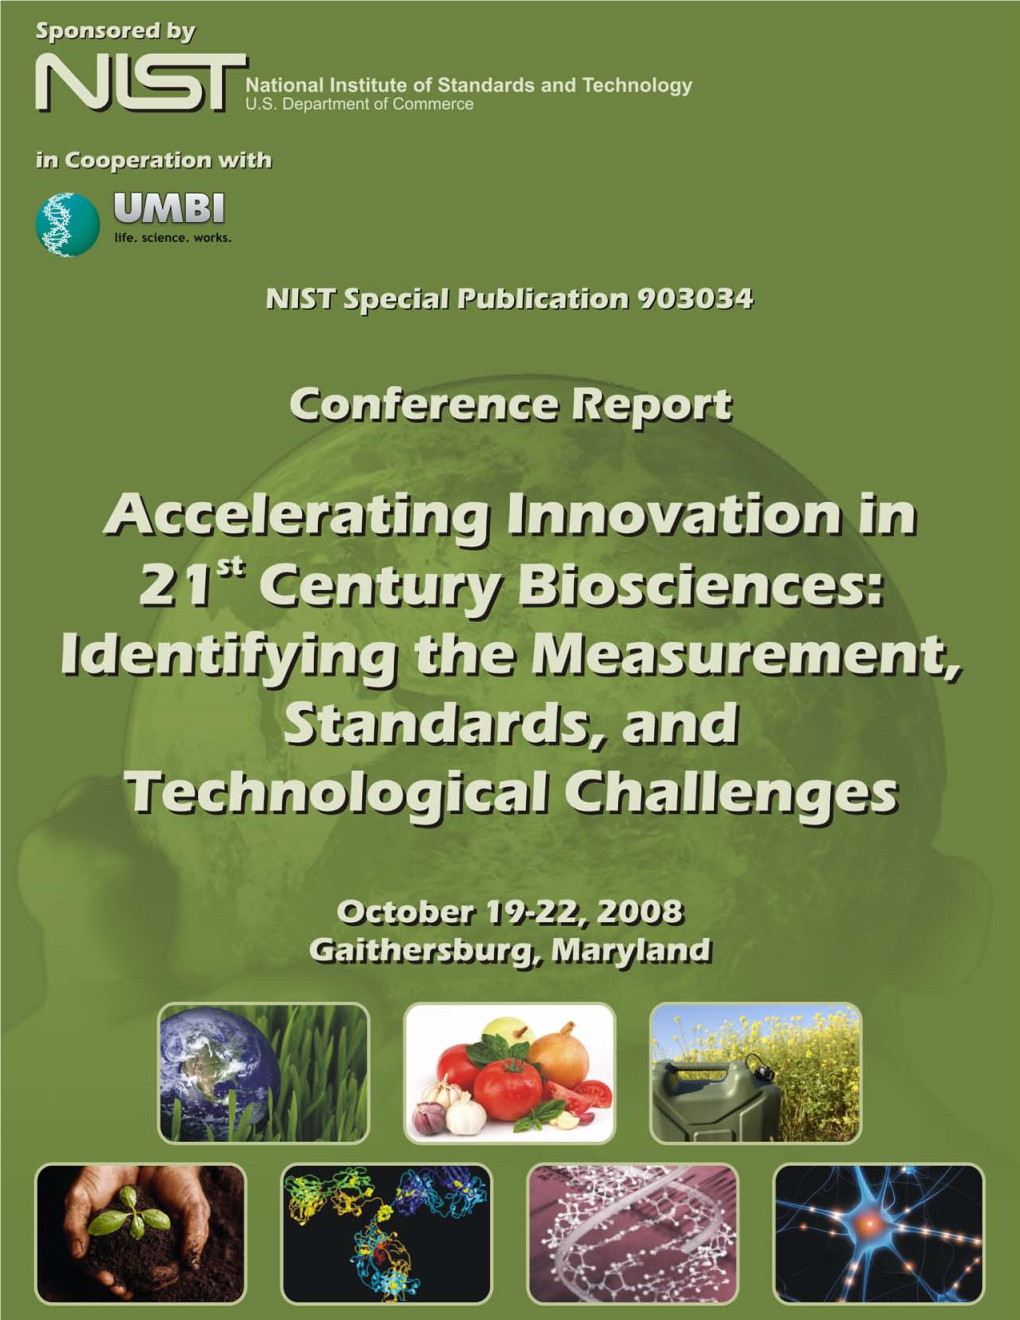 Accelerating Innovation in 21St Century Biosciences: Identifying the Measurement, Standards, and Technological Challenges